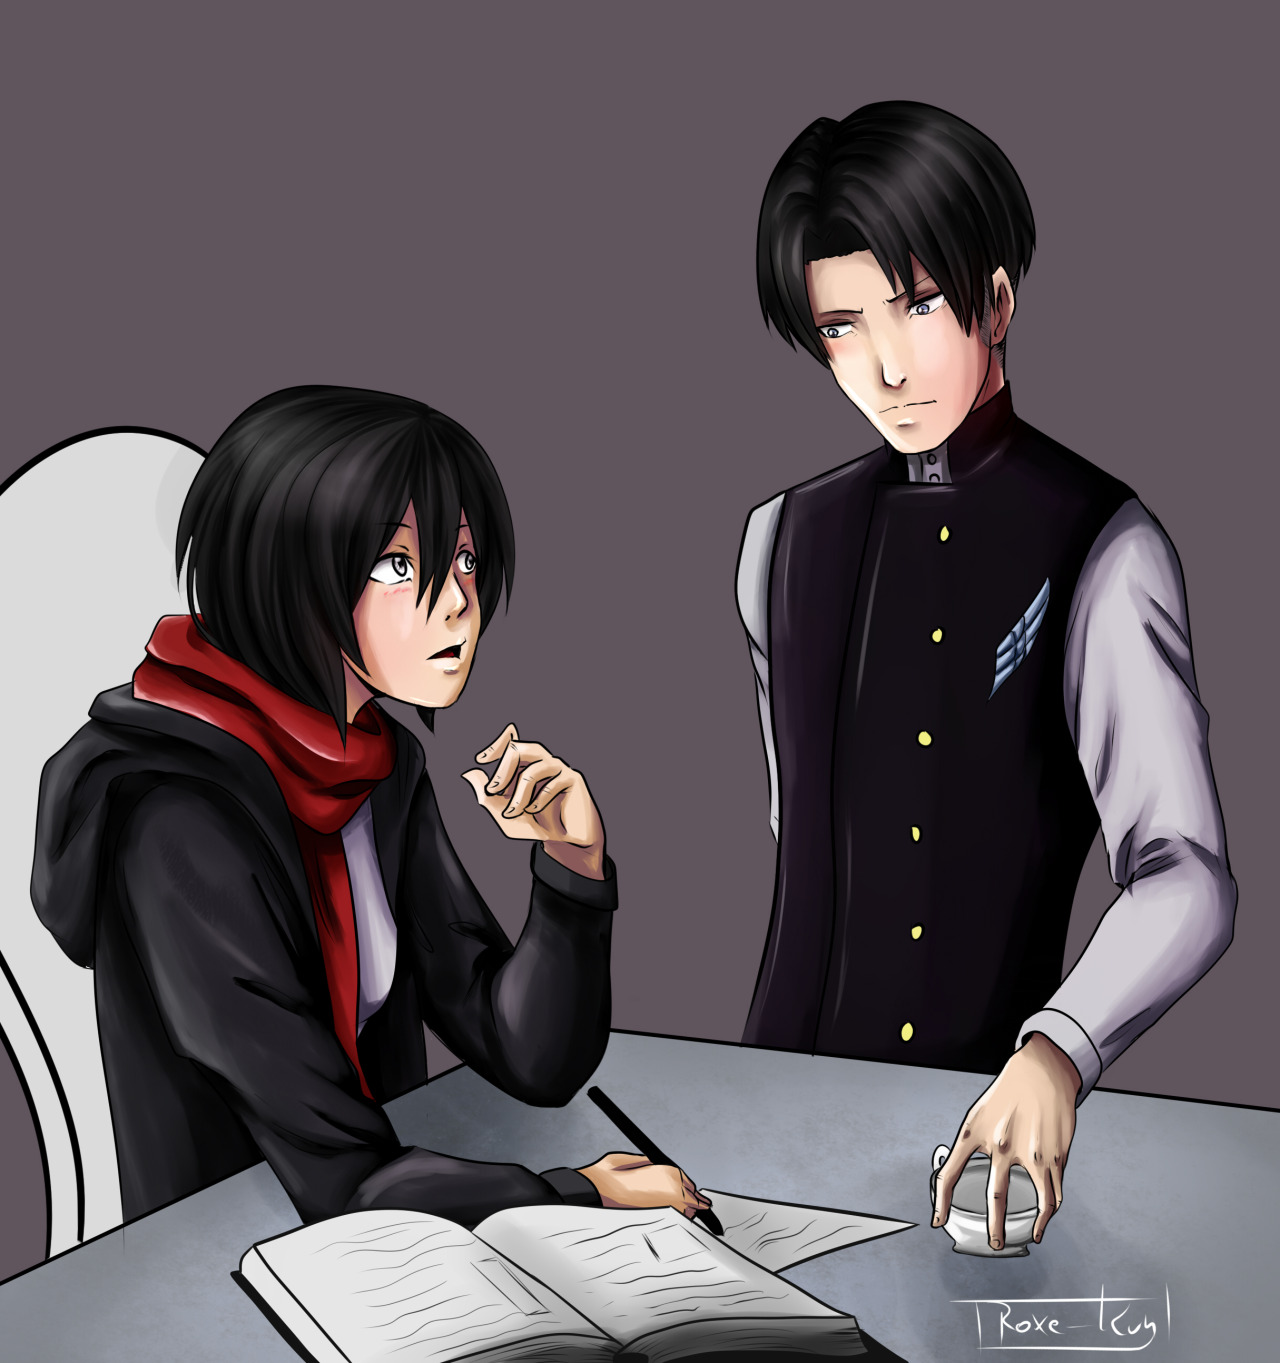 roxe-kun:  Waiter-Student AU cause yes Just giving a try how they look ;_;  (Talked